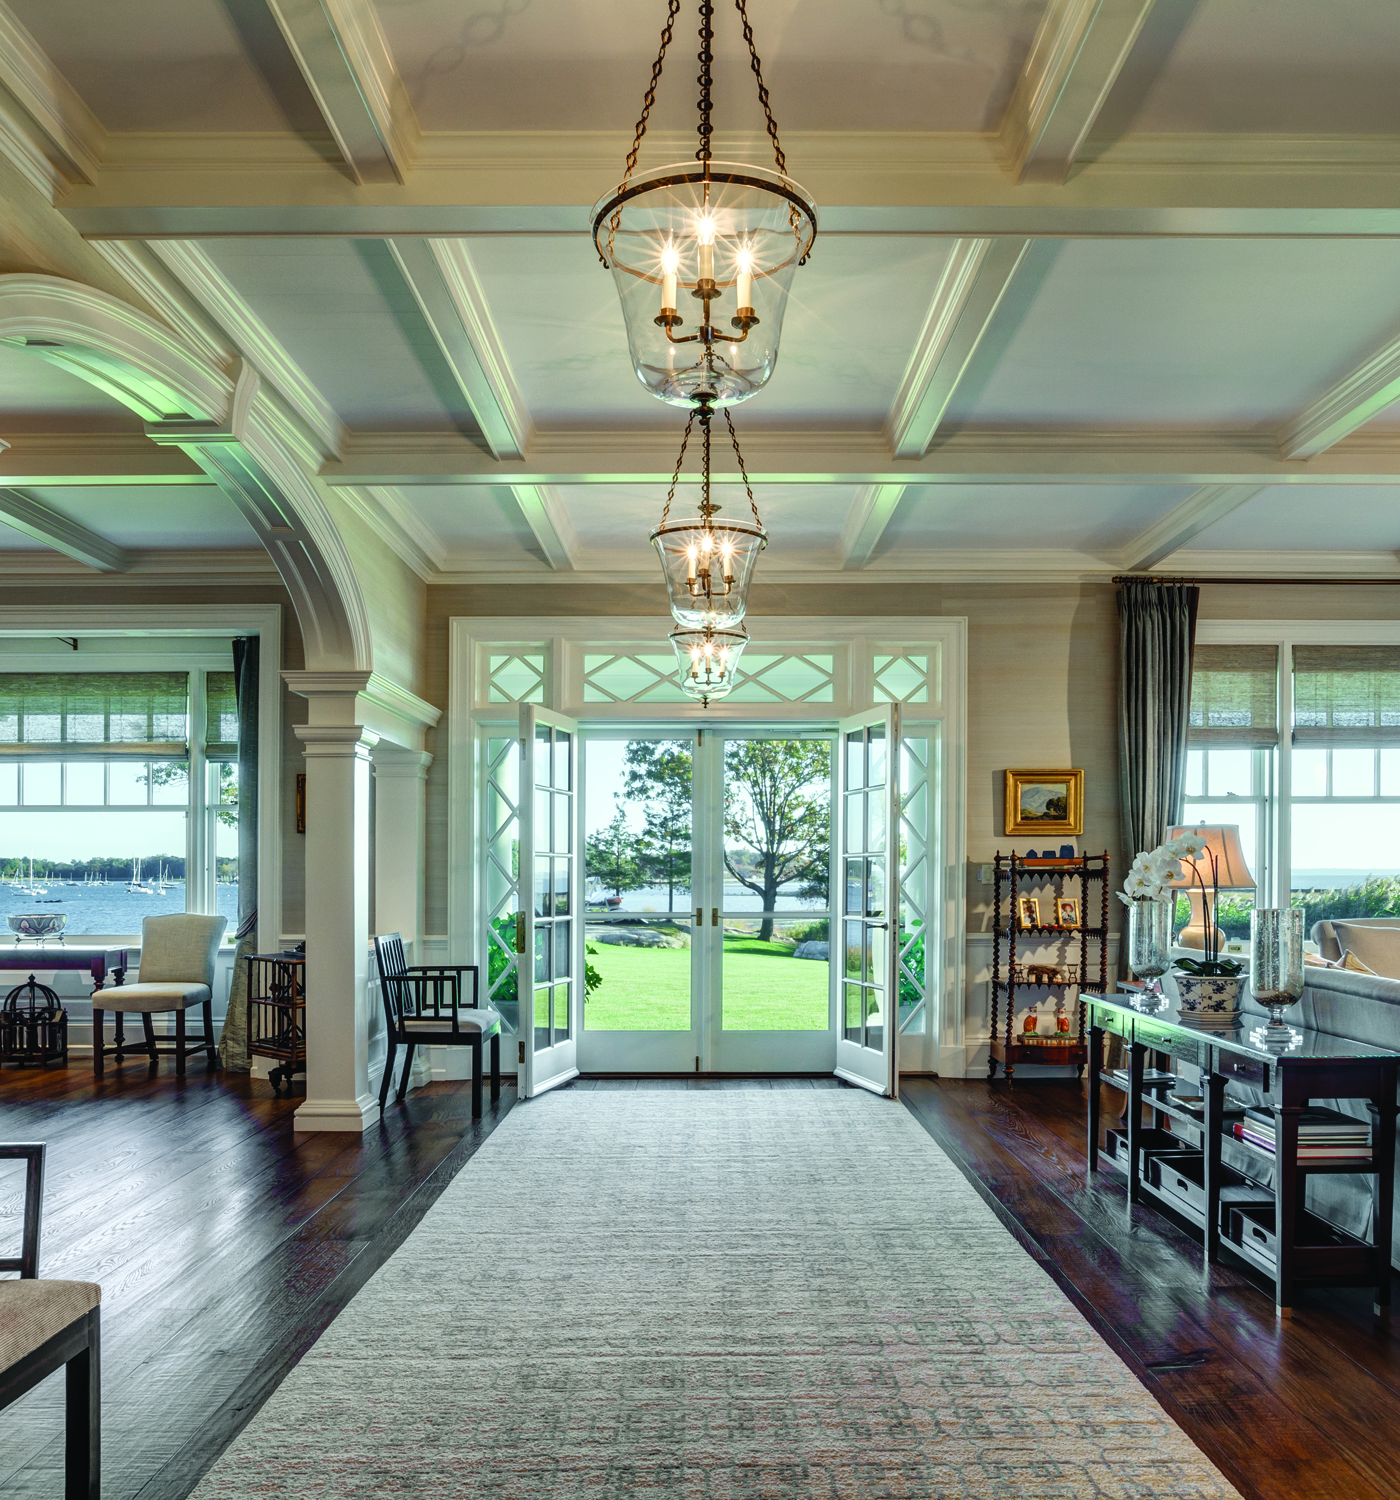 Waterfront-colonial-living-room-french-doors-coffered-ceiling-riverside-ct-interior-w.jpg